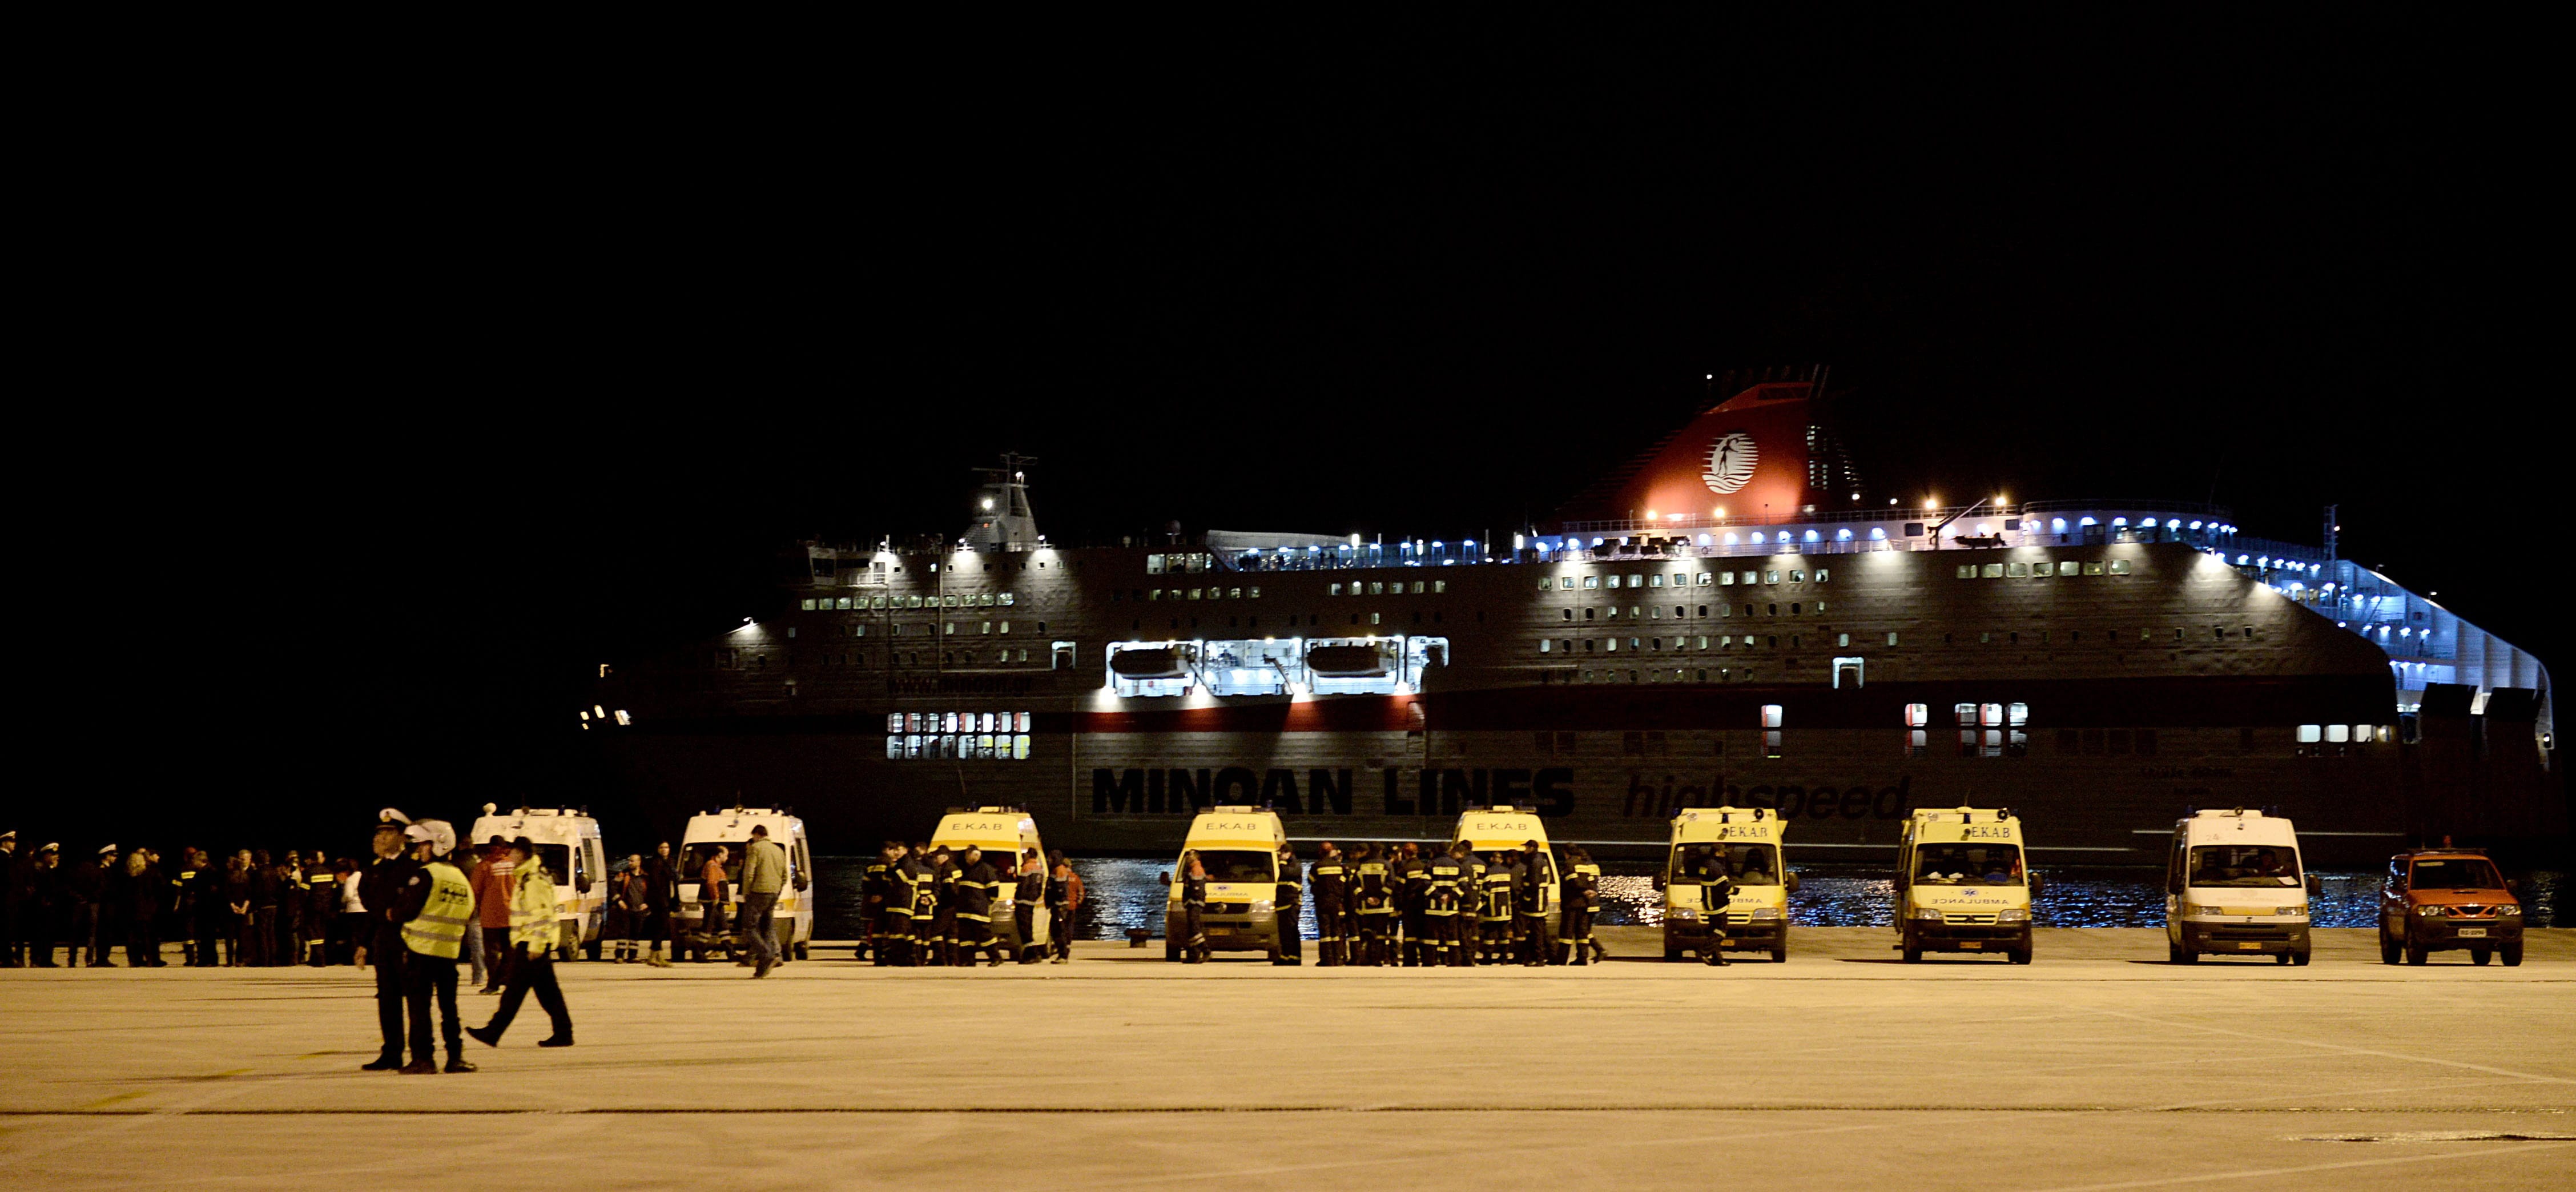 Ambulances are parked on the dock as Cruise Europa ferry arrives at Igoumenitsa port, northwestern Greece, carry rescued passengers from the fire-struck ferry Norman Atlantic, on Monday.